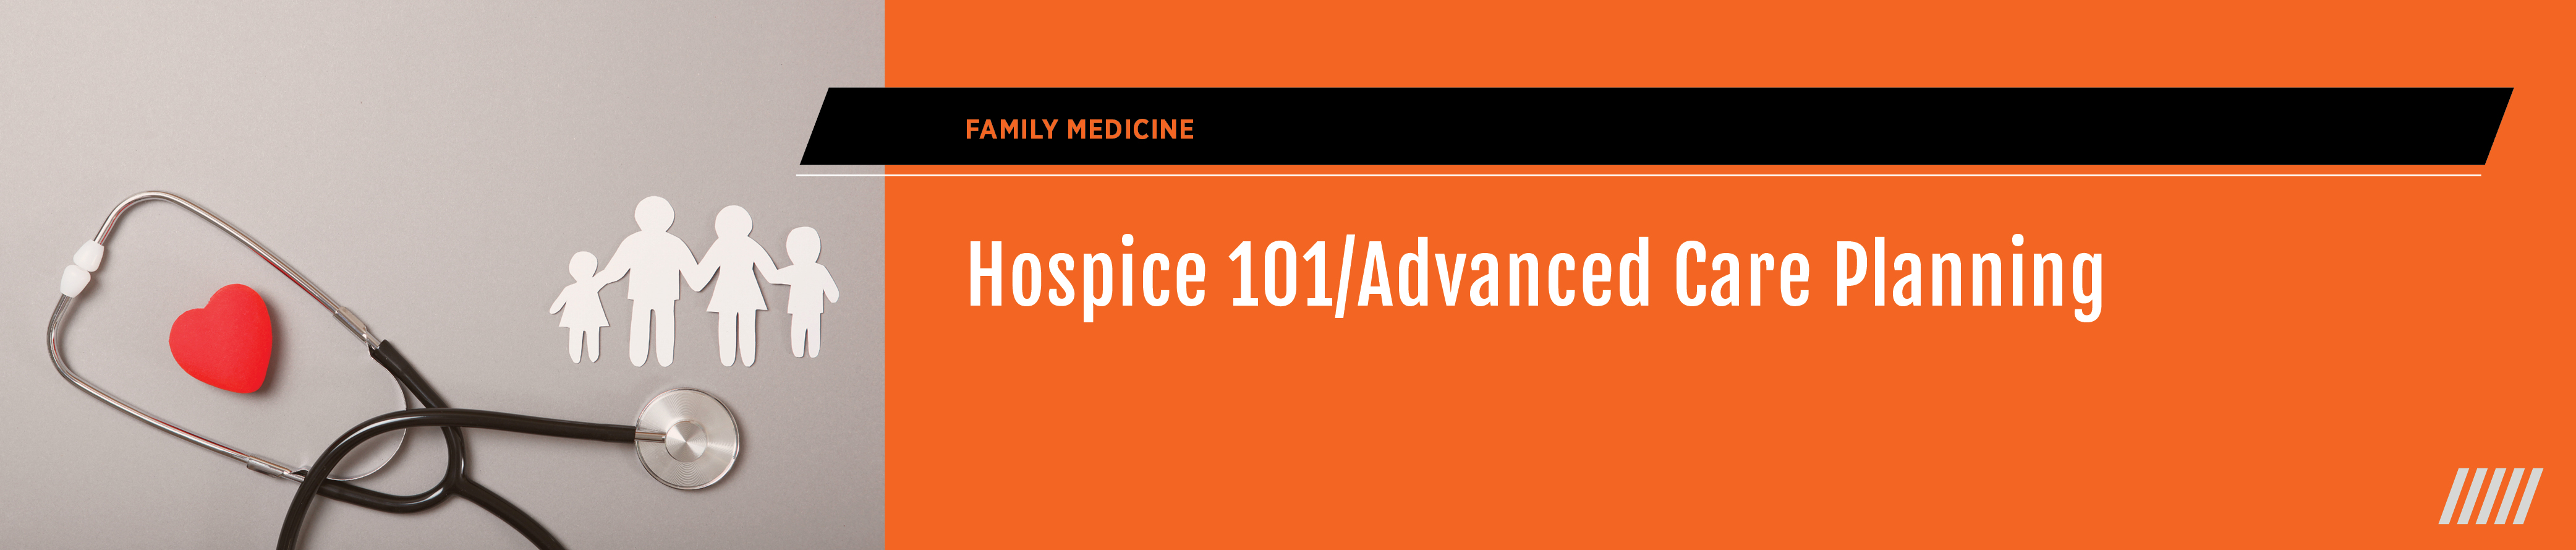 Hospice 101/Advanced Care Planning Banner